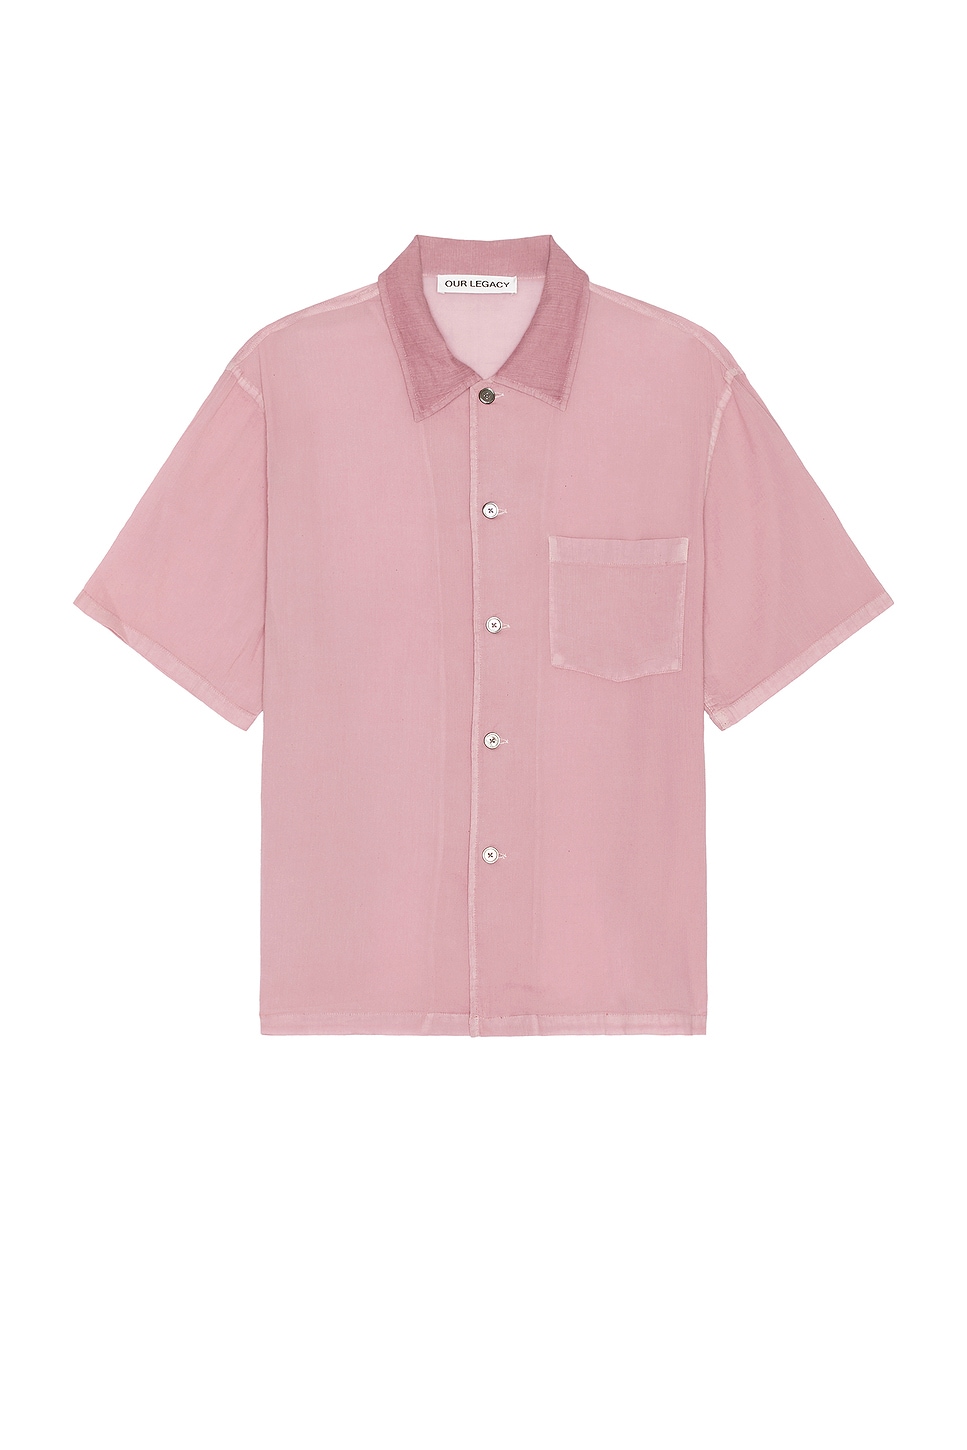 Image 1 of Our Legacy Box Shirt Shortsleeve in Dusty Lilac Coated Voile